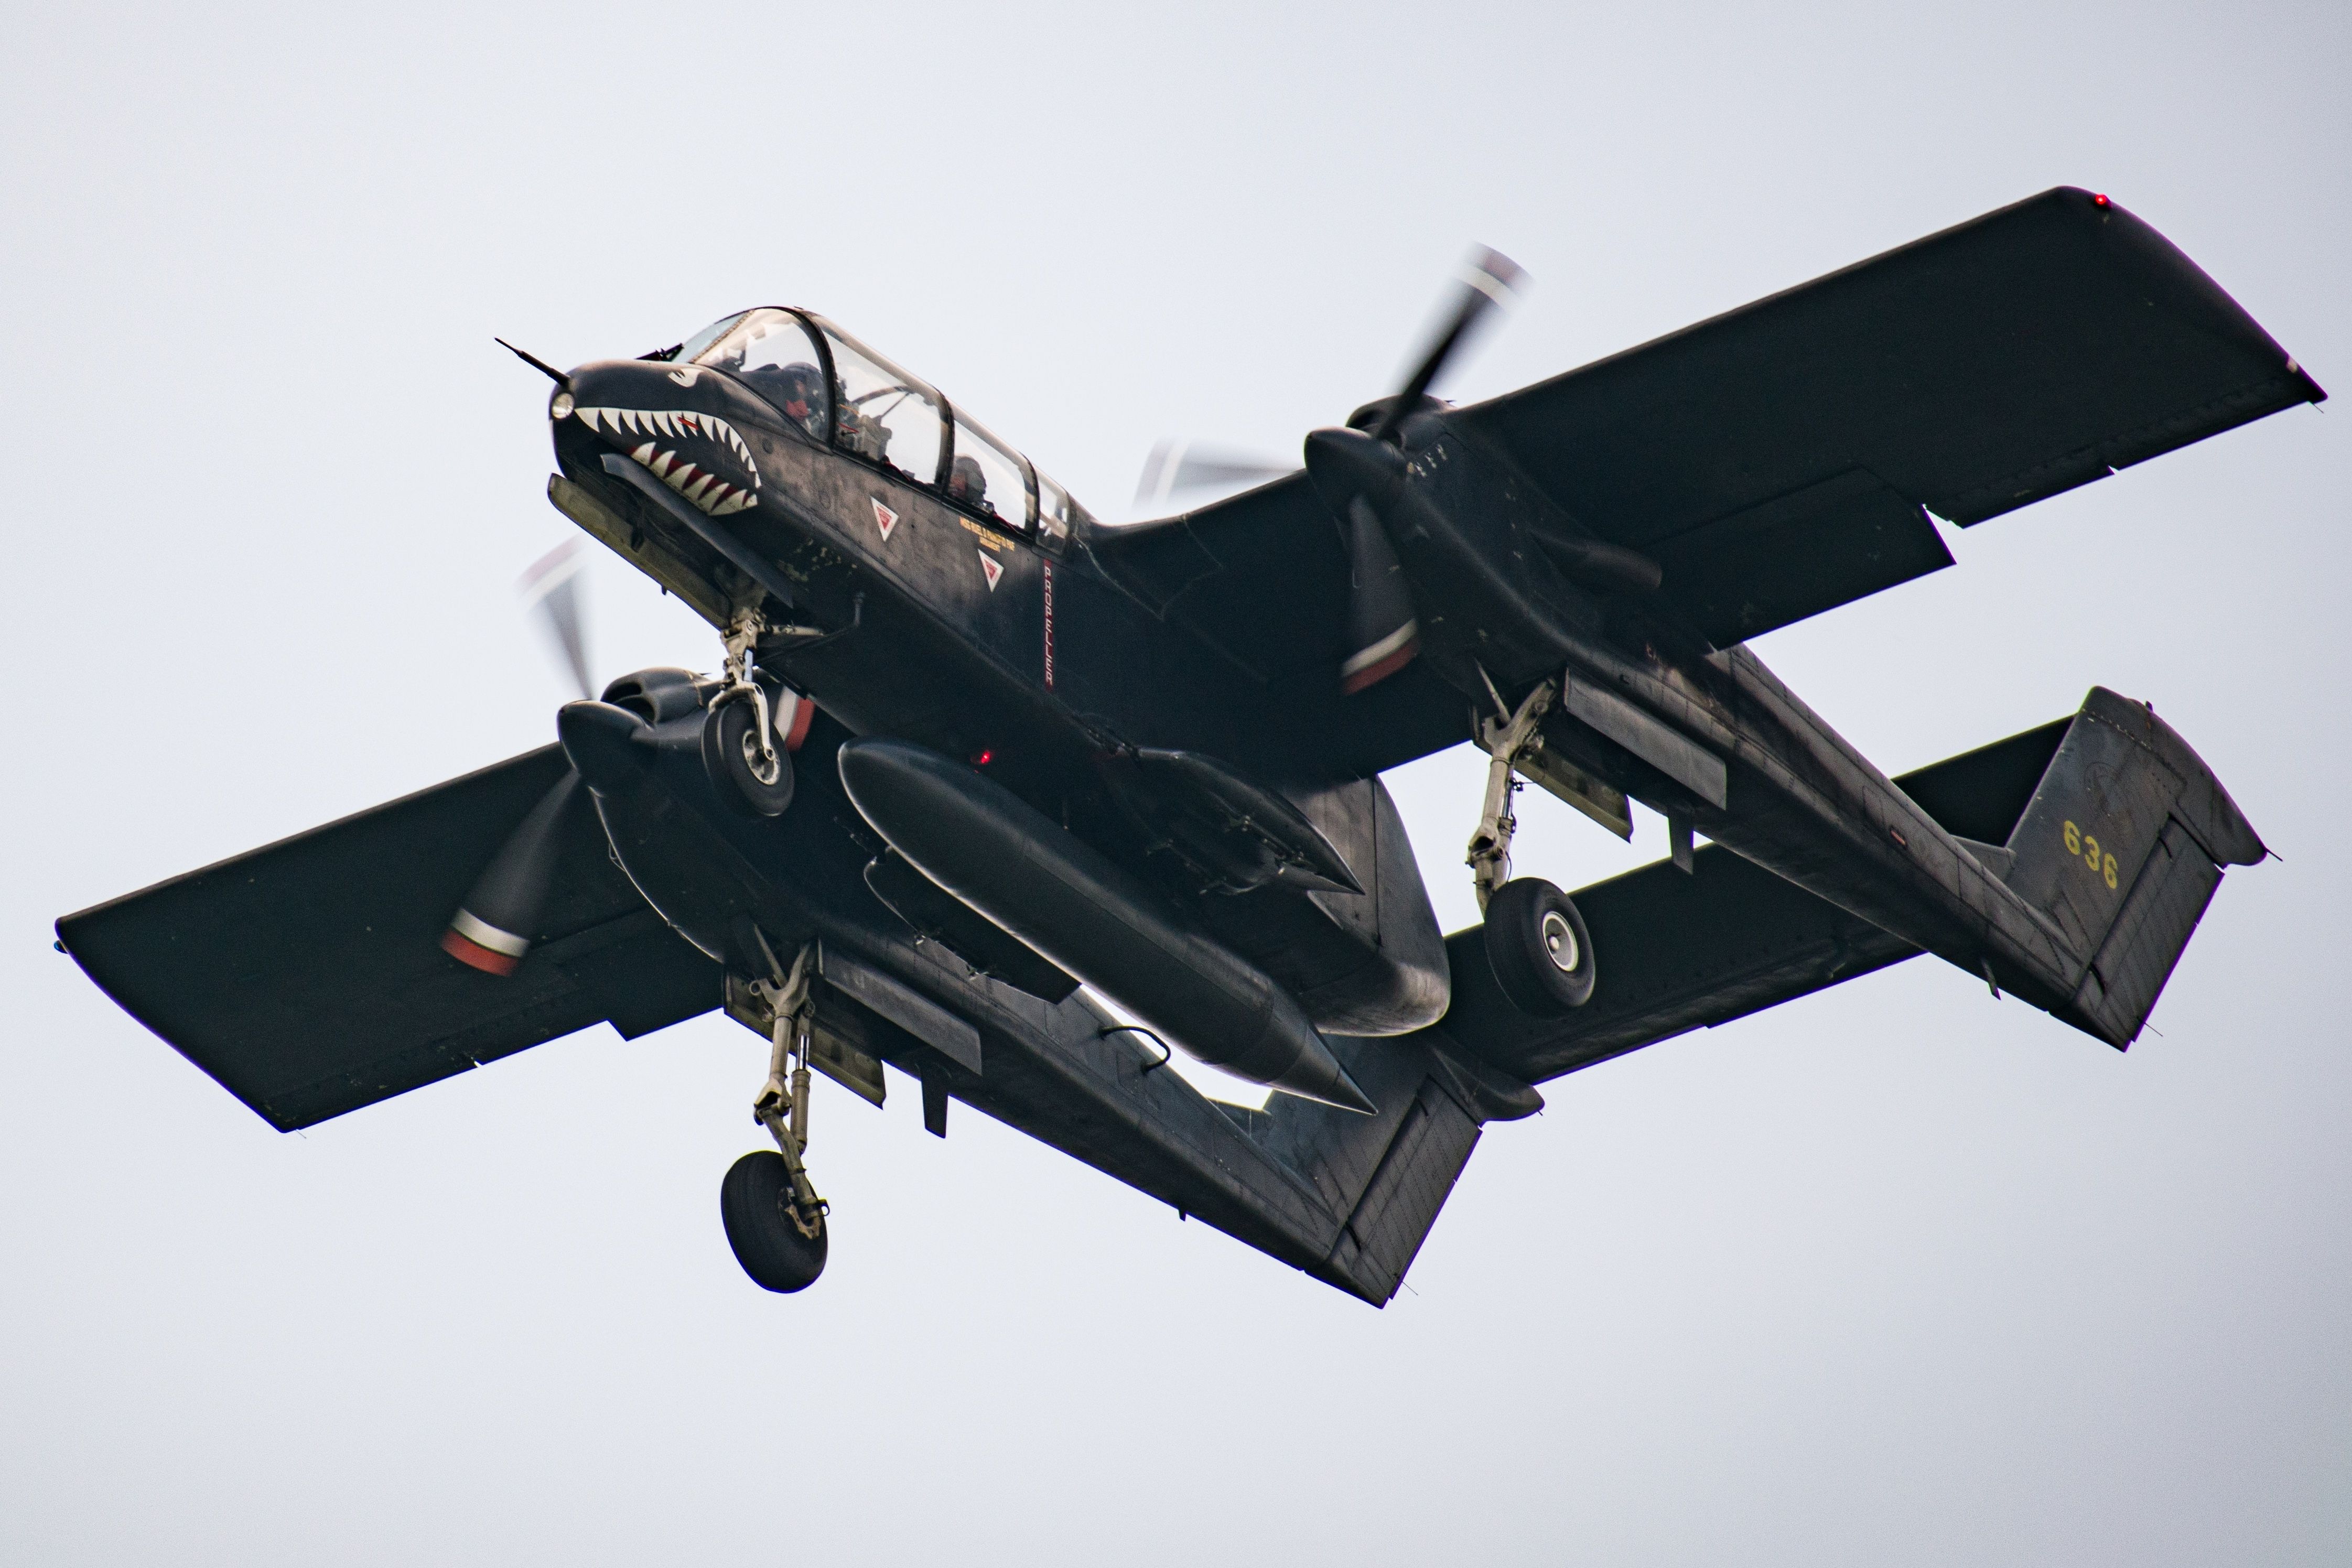 A North American OV-10 Bronco flying in the sky.